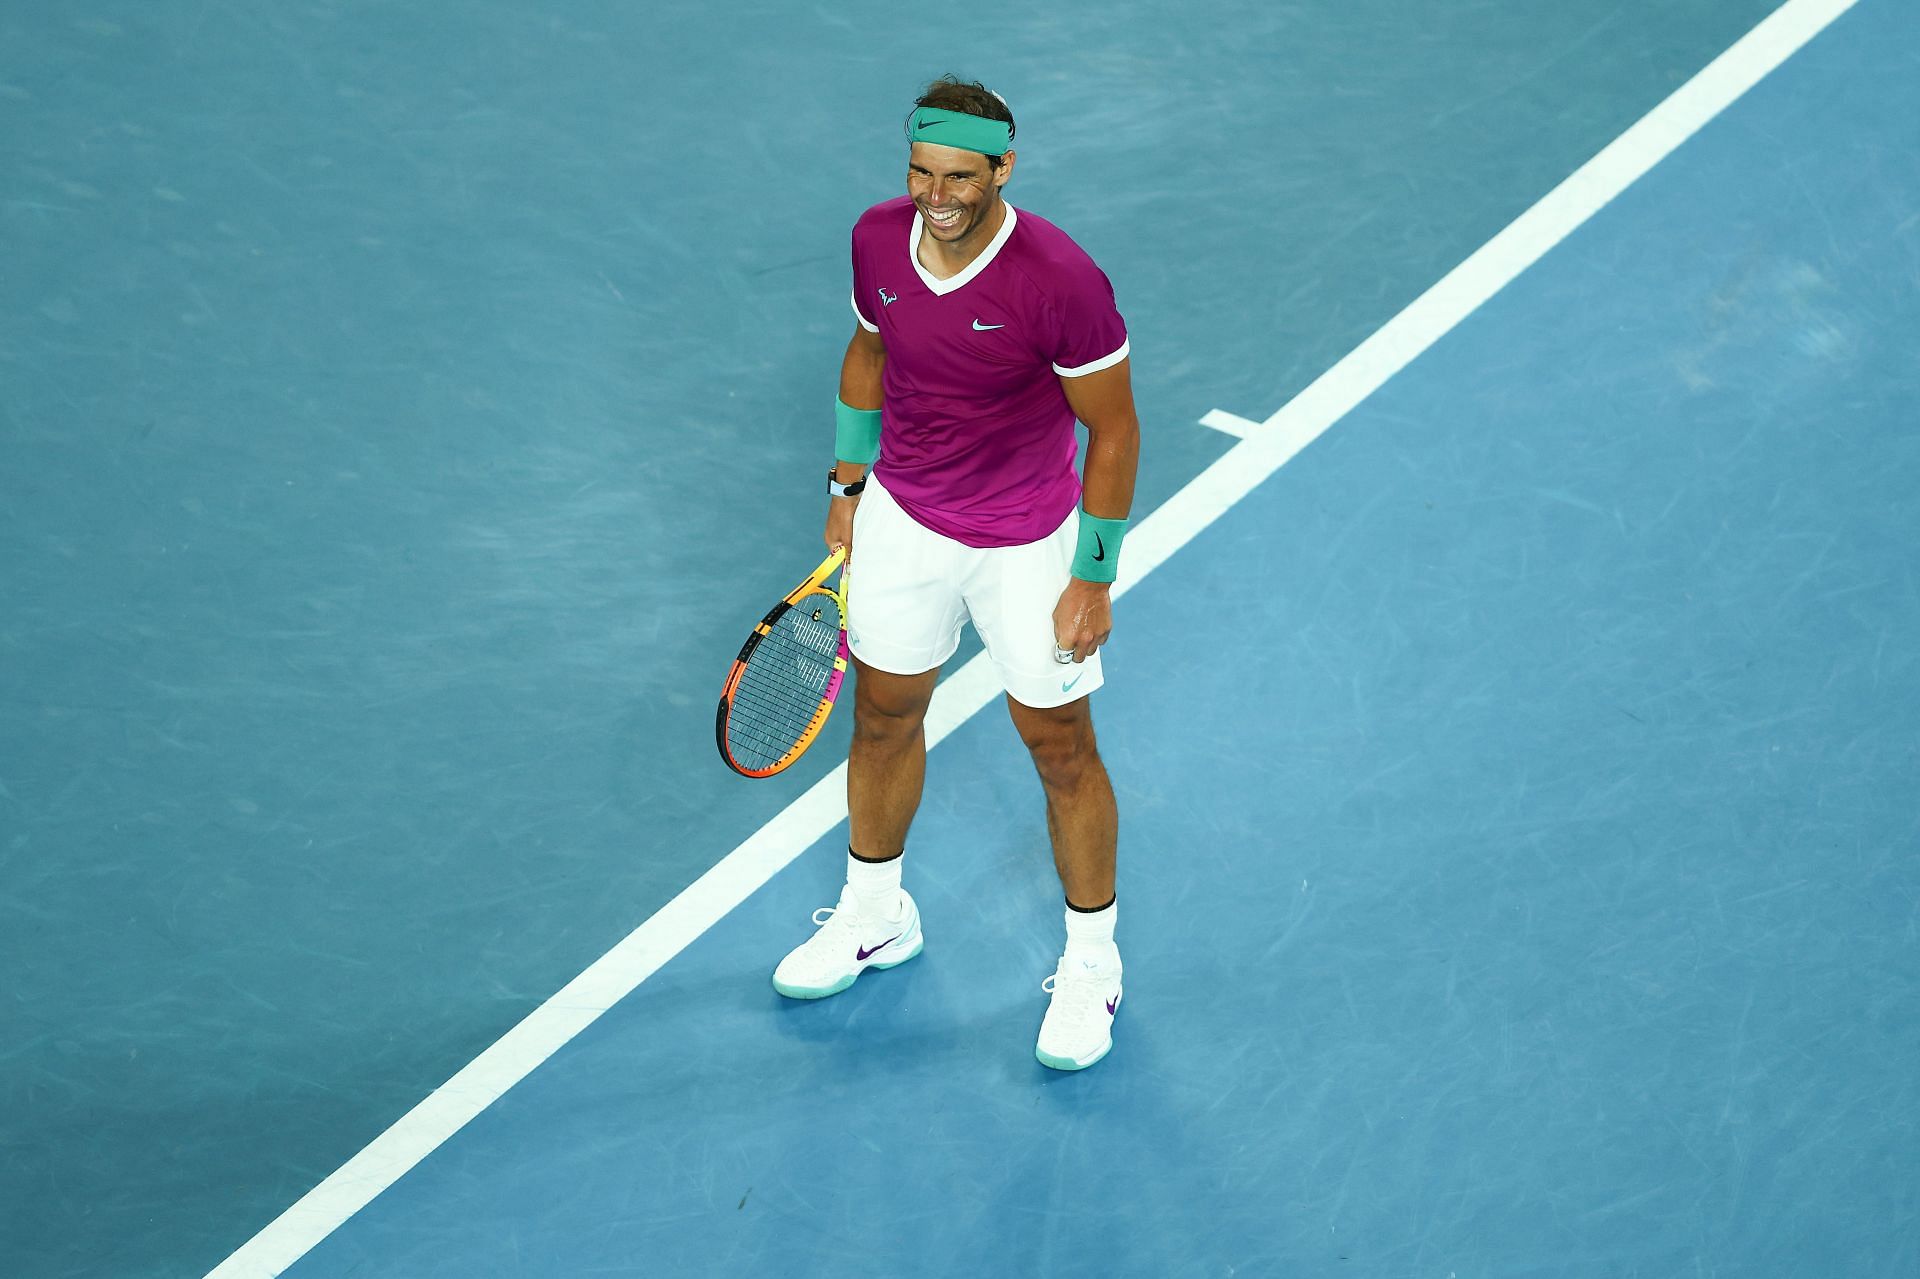 Nadal after his semifinal win at the 2022 Australian Open.